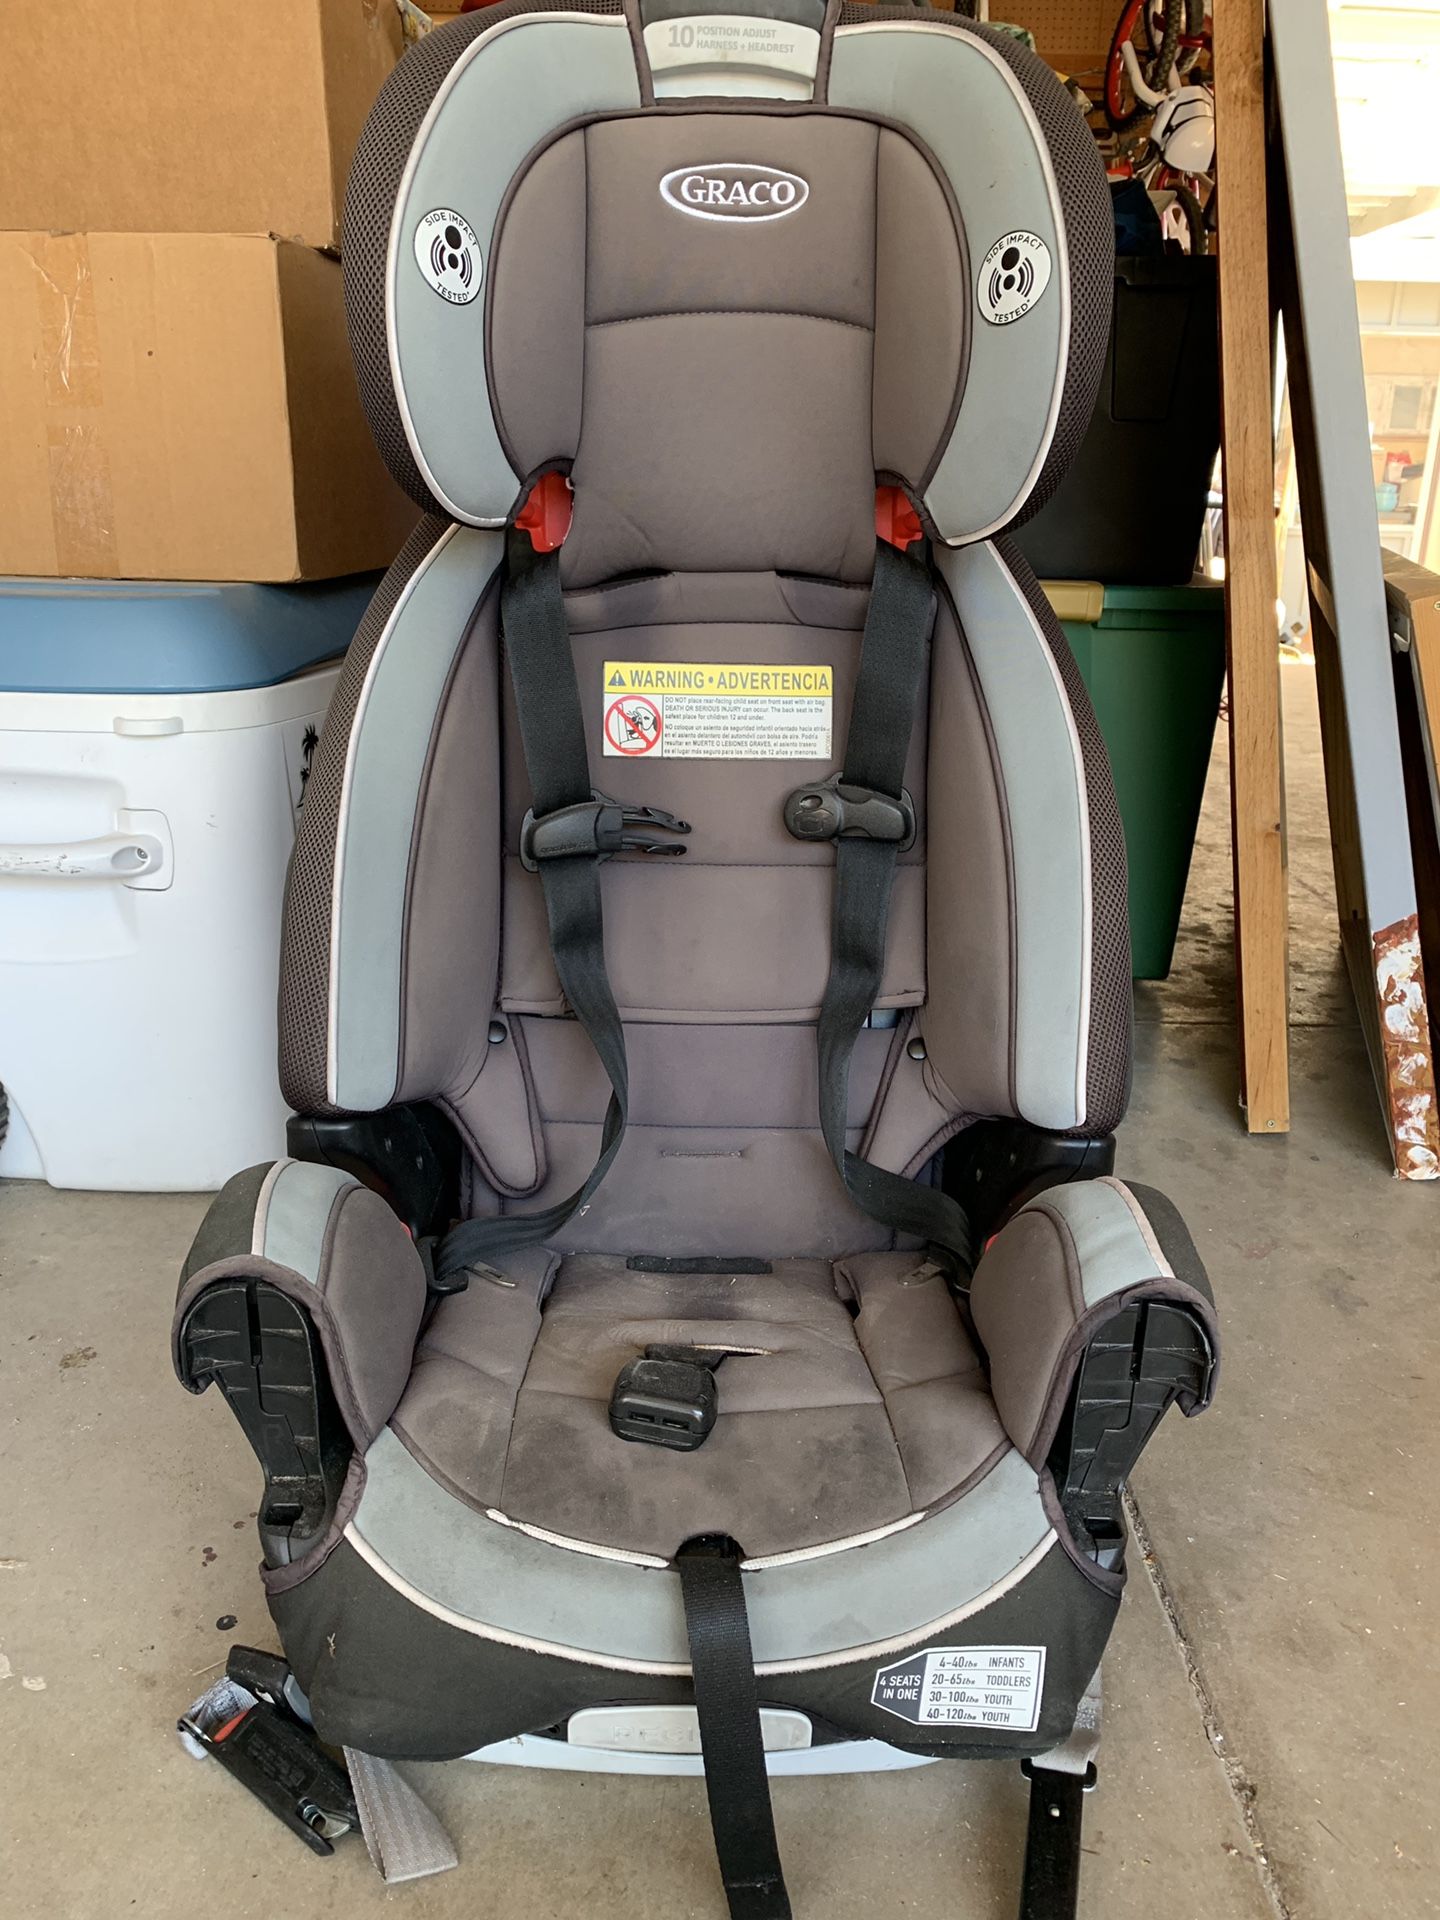 Graco car seat - 4 seats in one